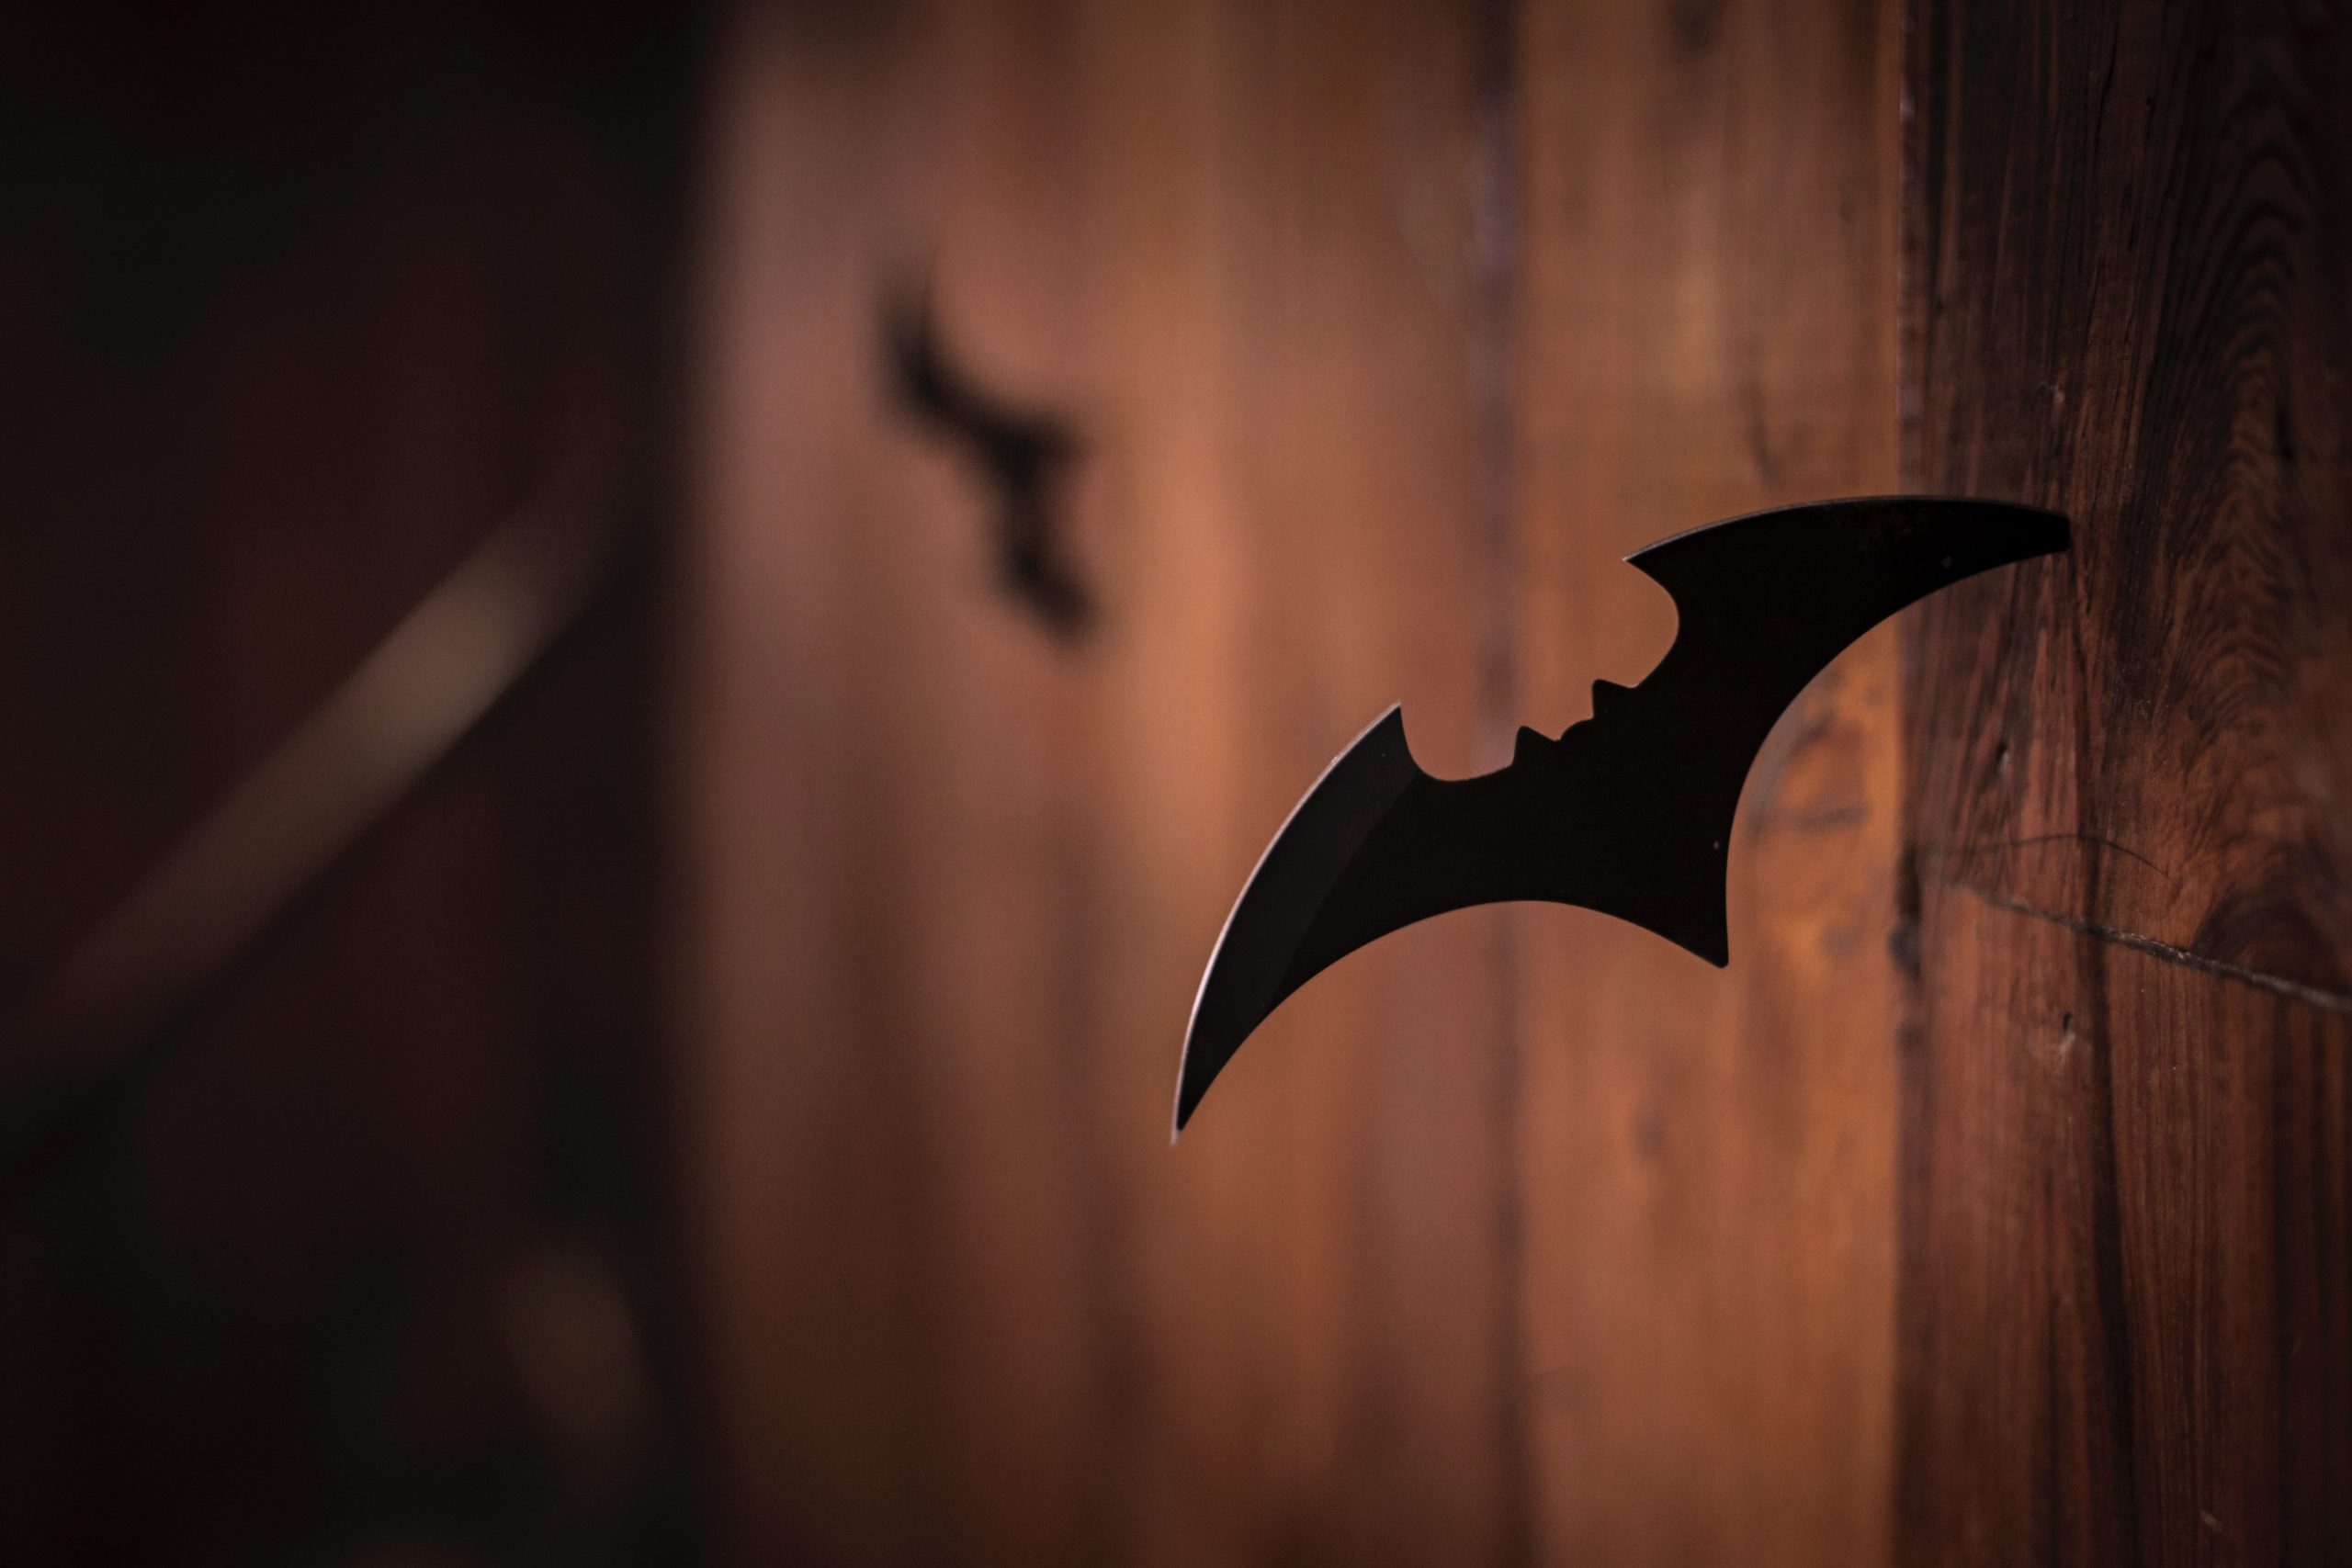 World's First Batman Themed Restaurant To Open In London